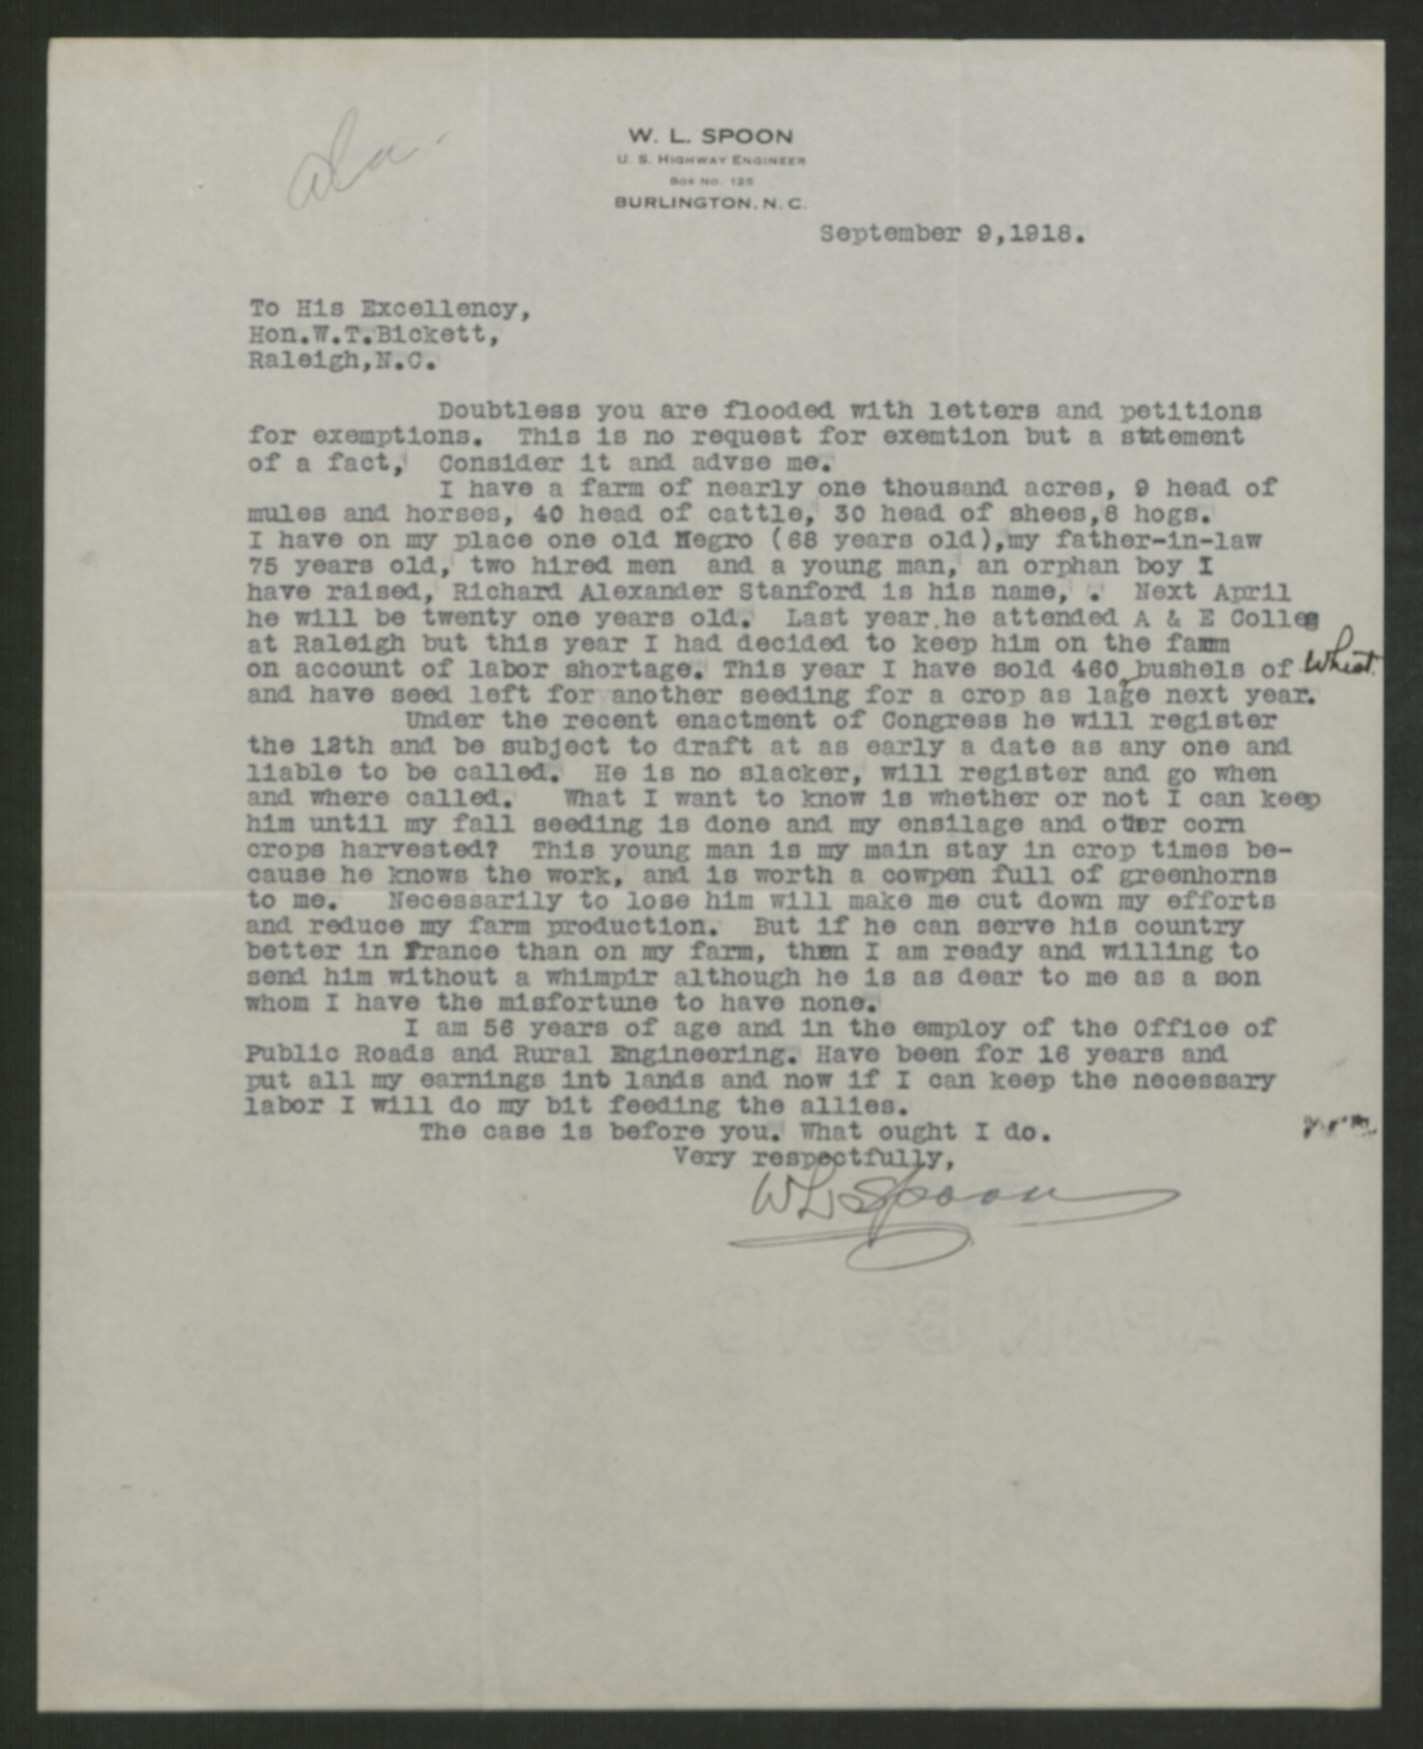 Letter from William L. Spoon to Thomas W. Bickett, September 9, 1918